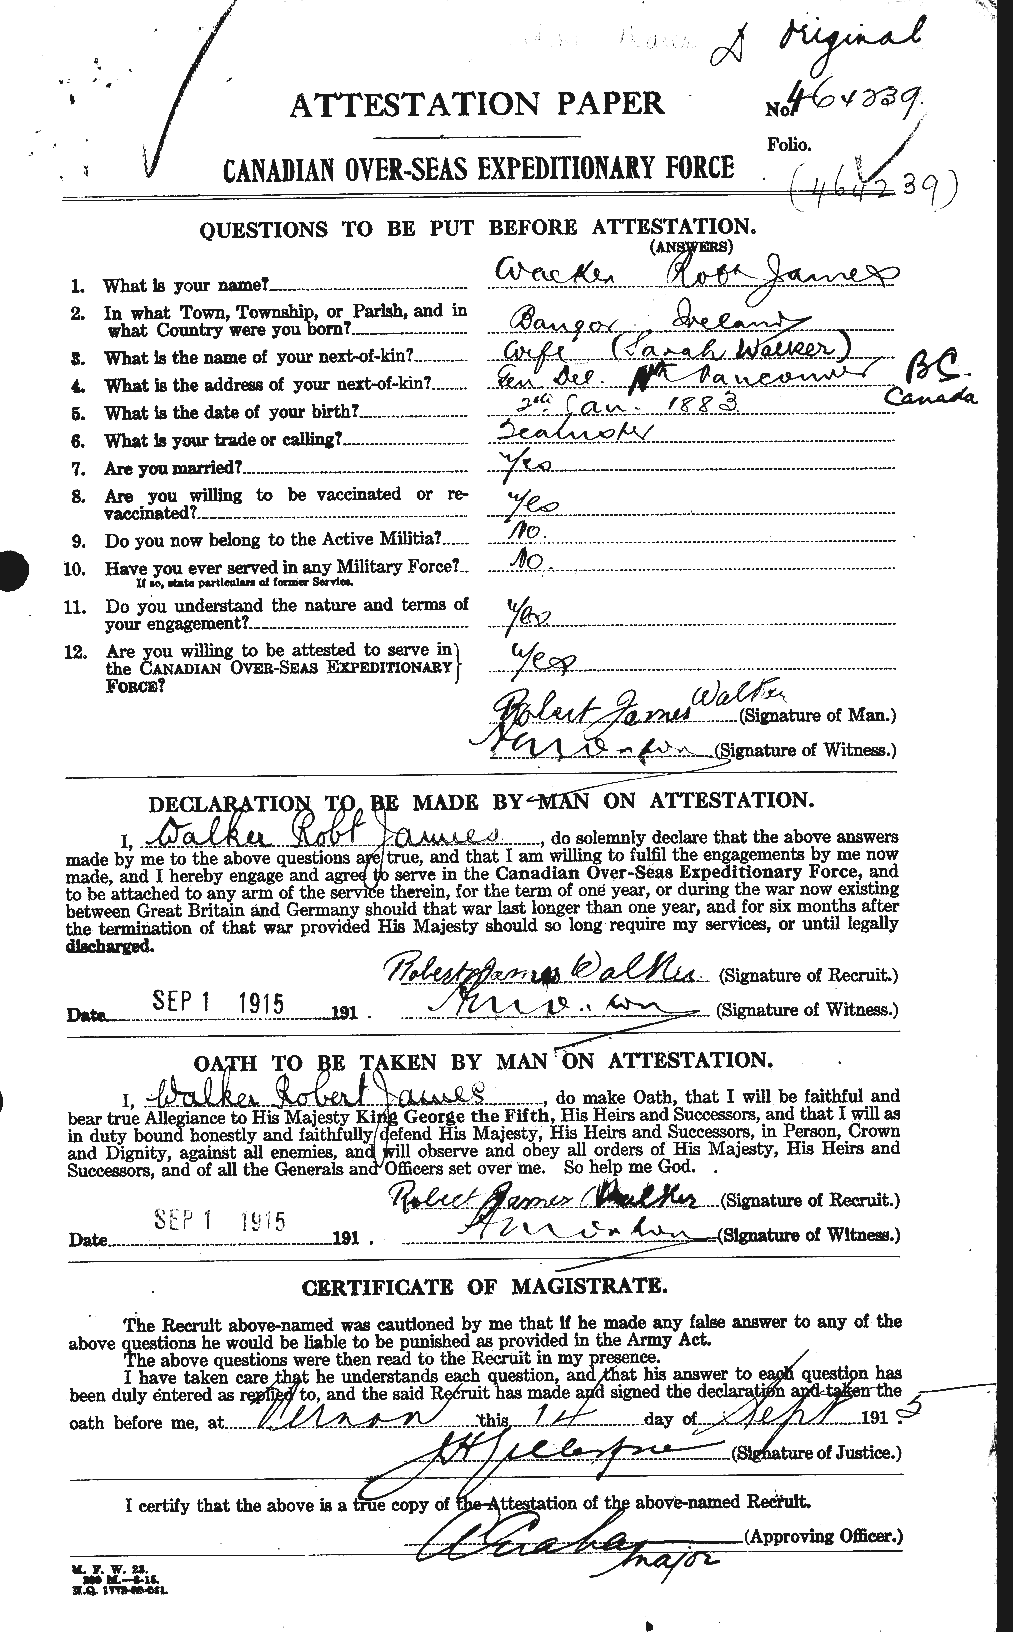 Personnel Records of the First World War - CEF 655715a